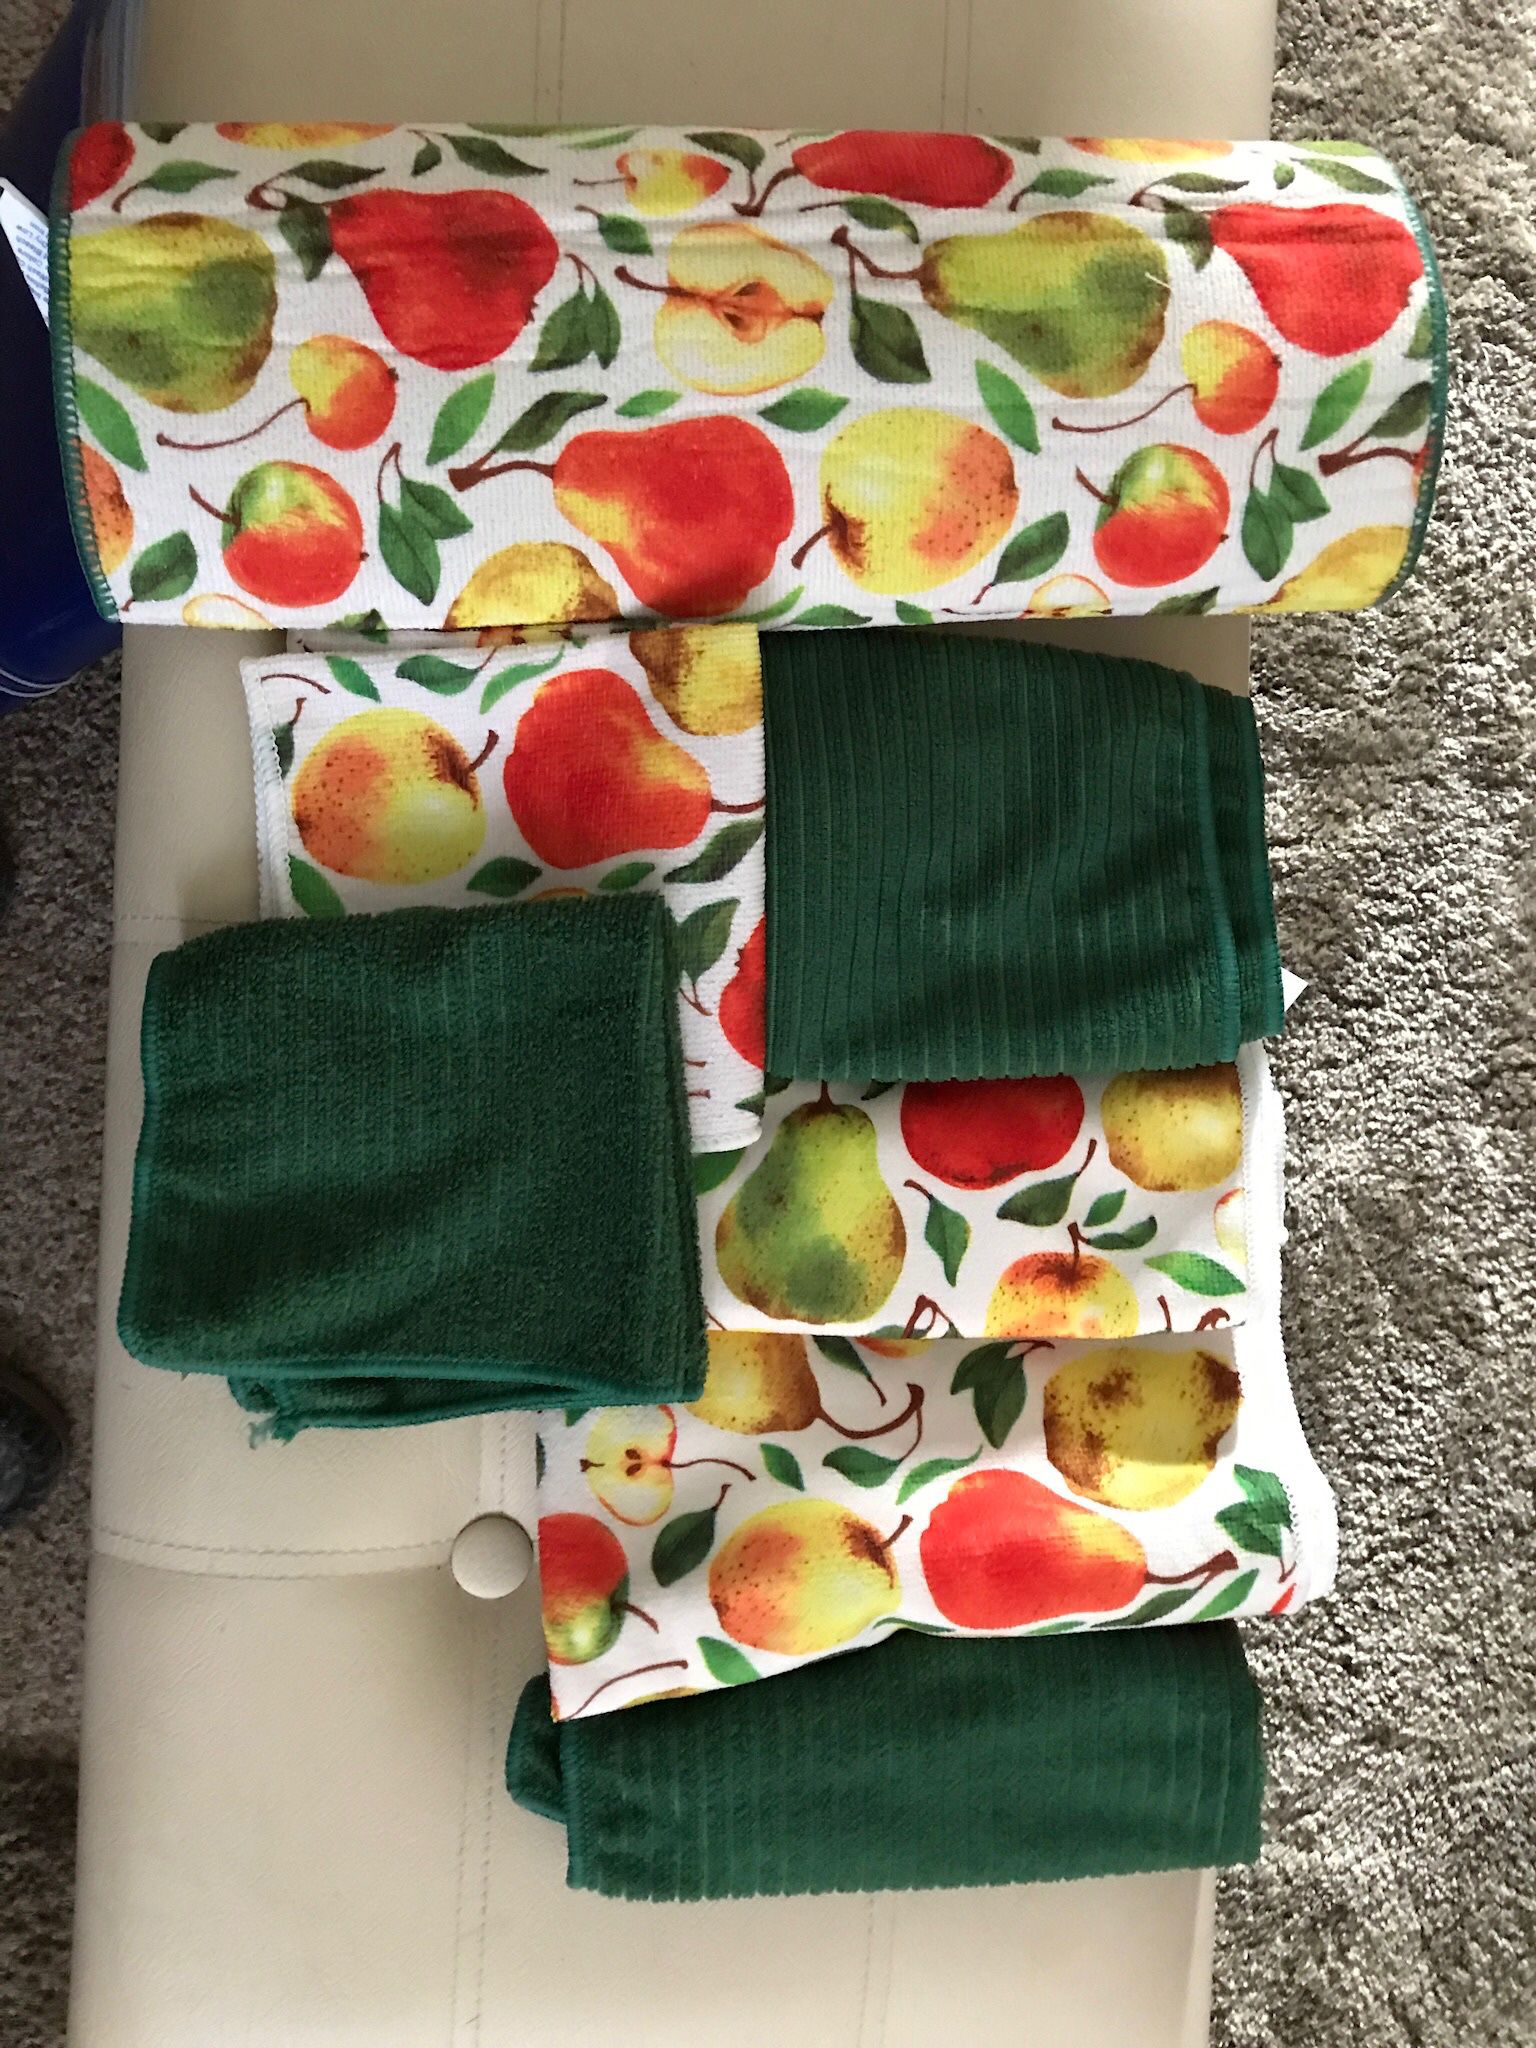 Kitchen Towels, Colorful Apples Pears  7 Piece  Set, New. $12.00